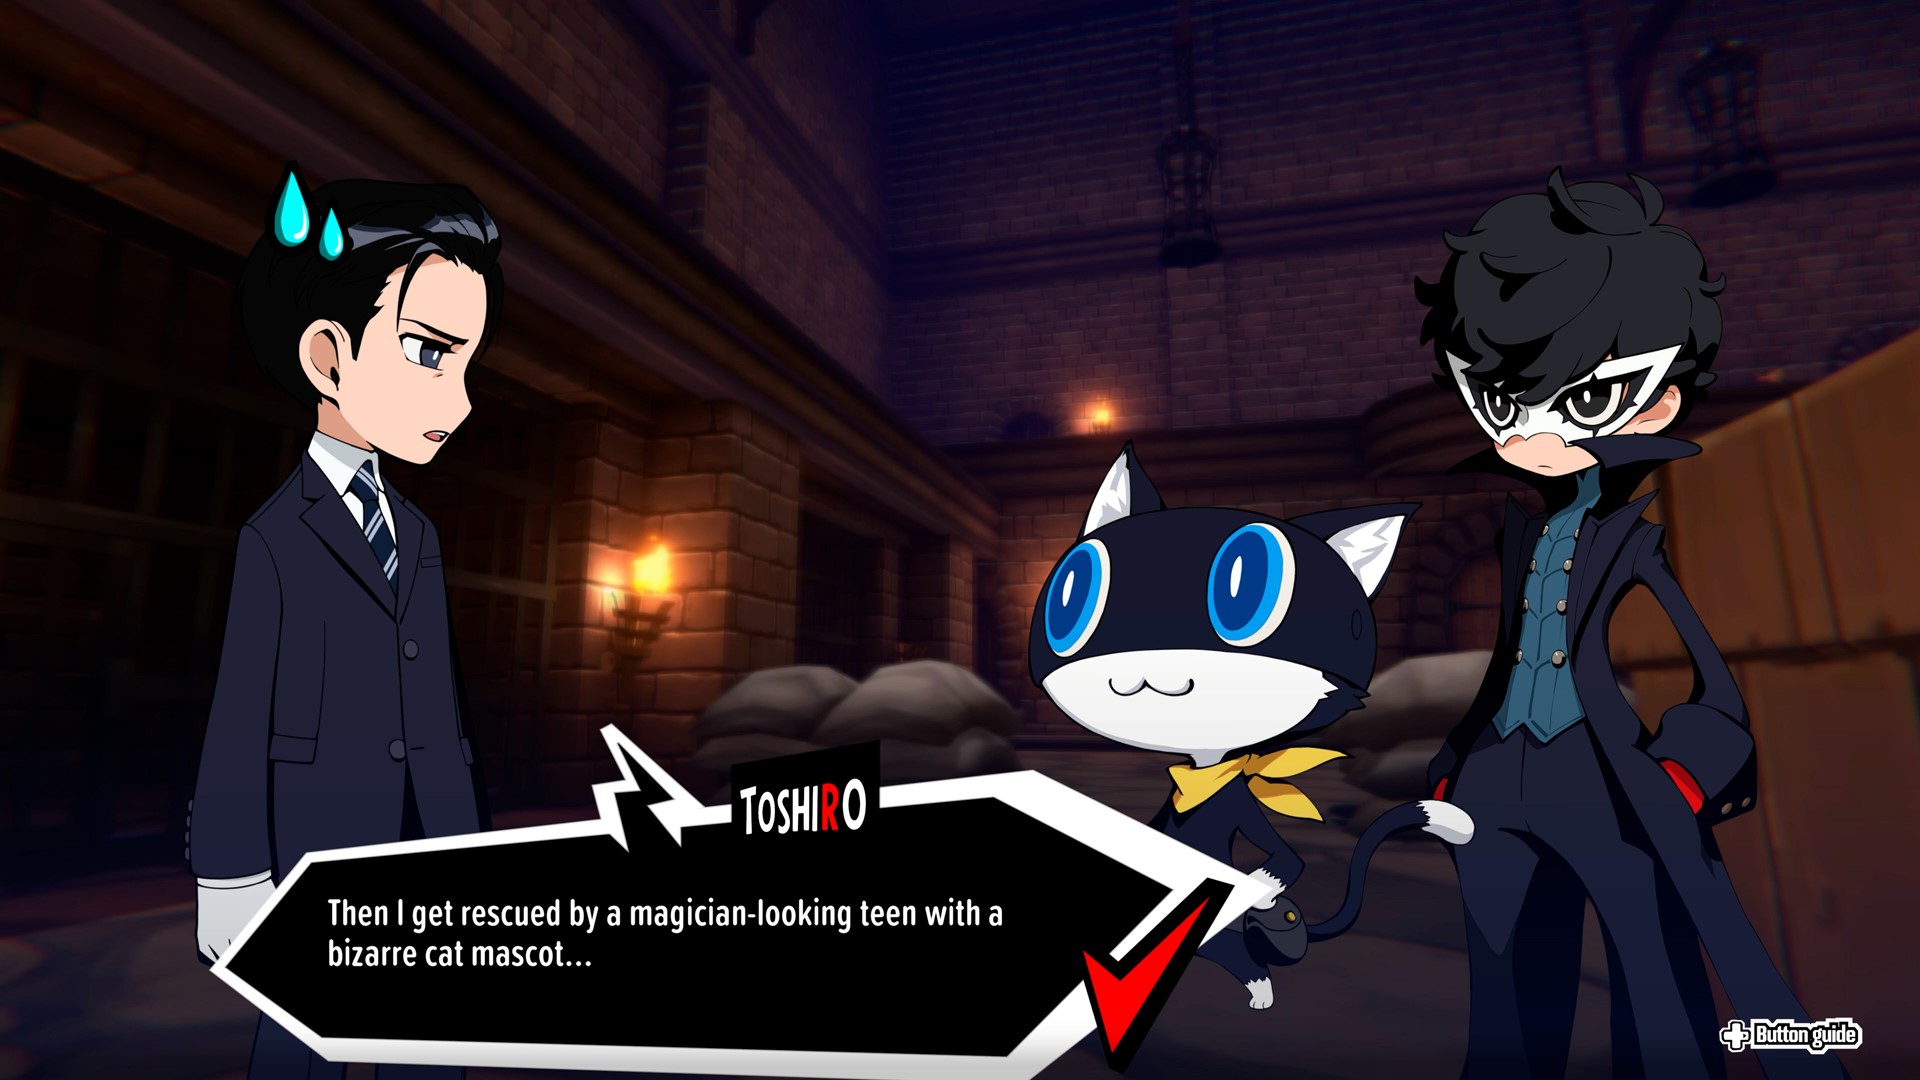 Persona 5 Tactica details Kingdoms, characters, gameplay